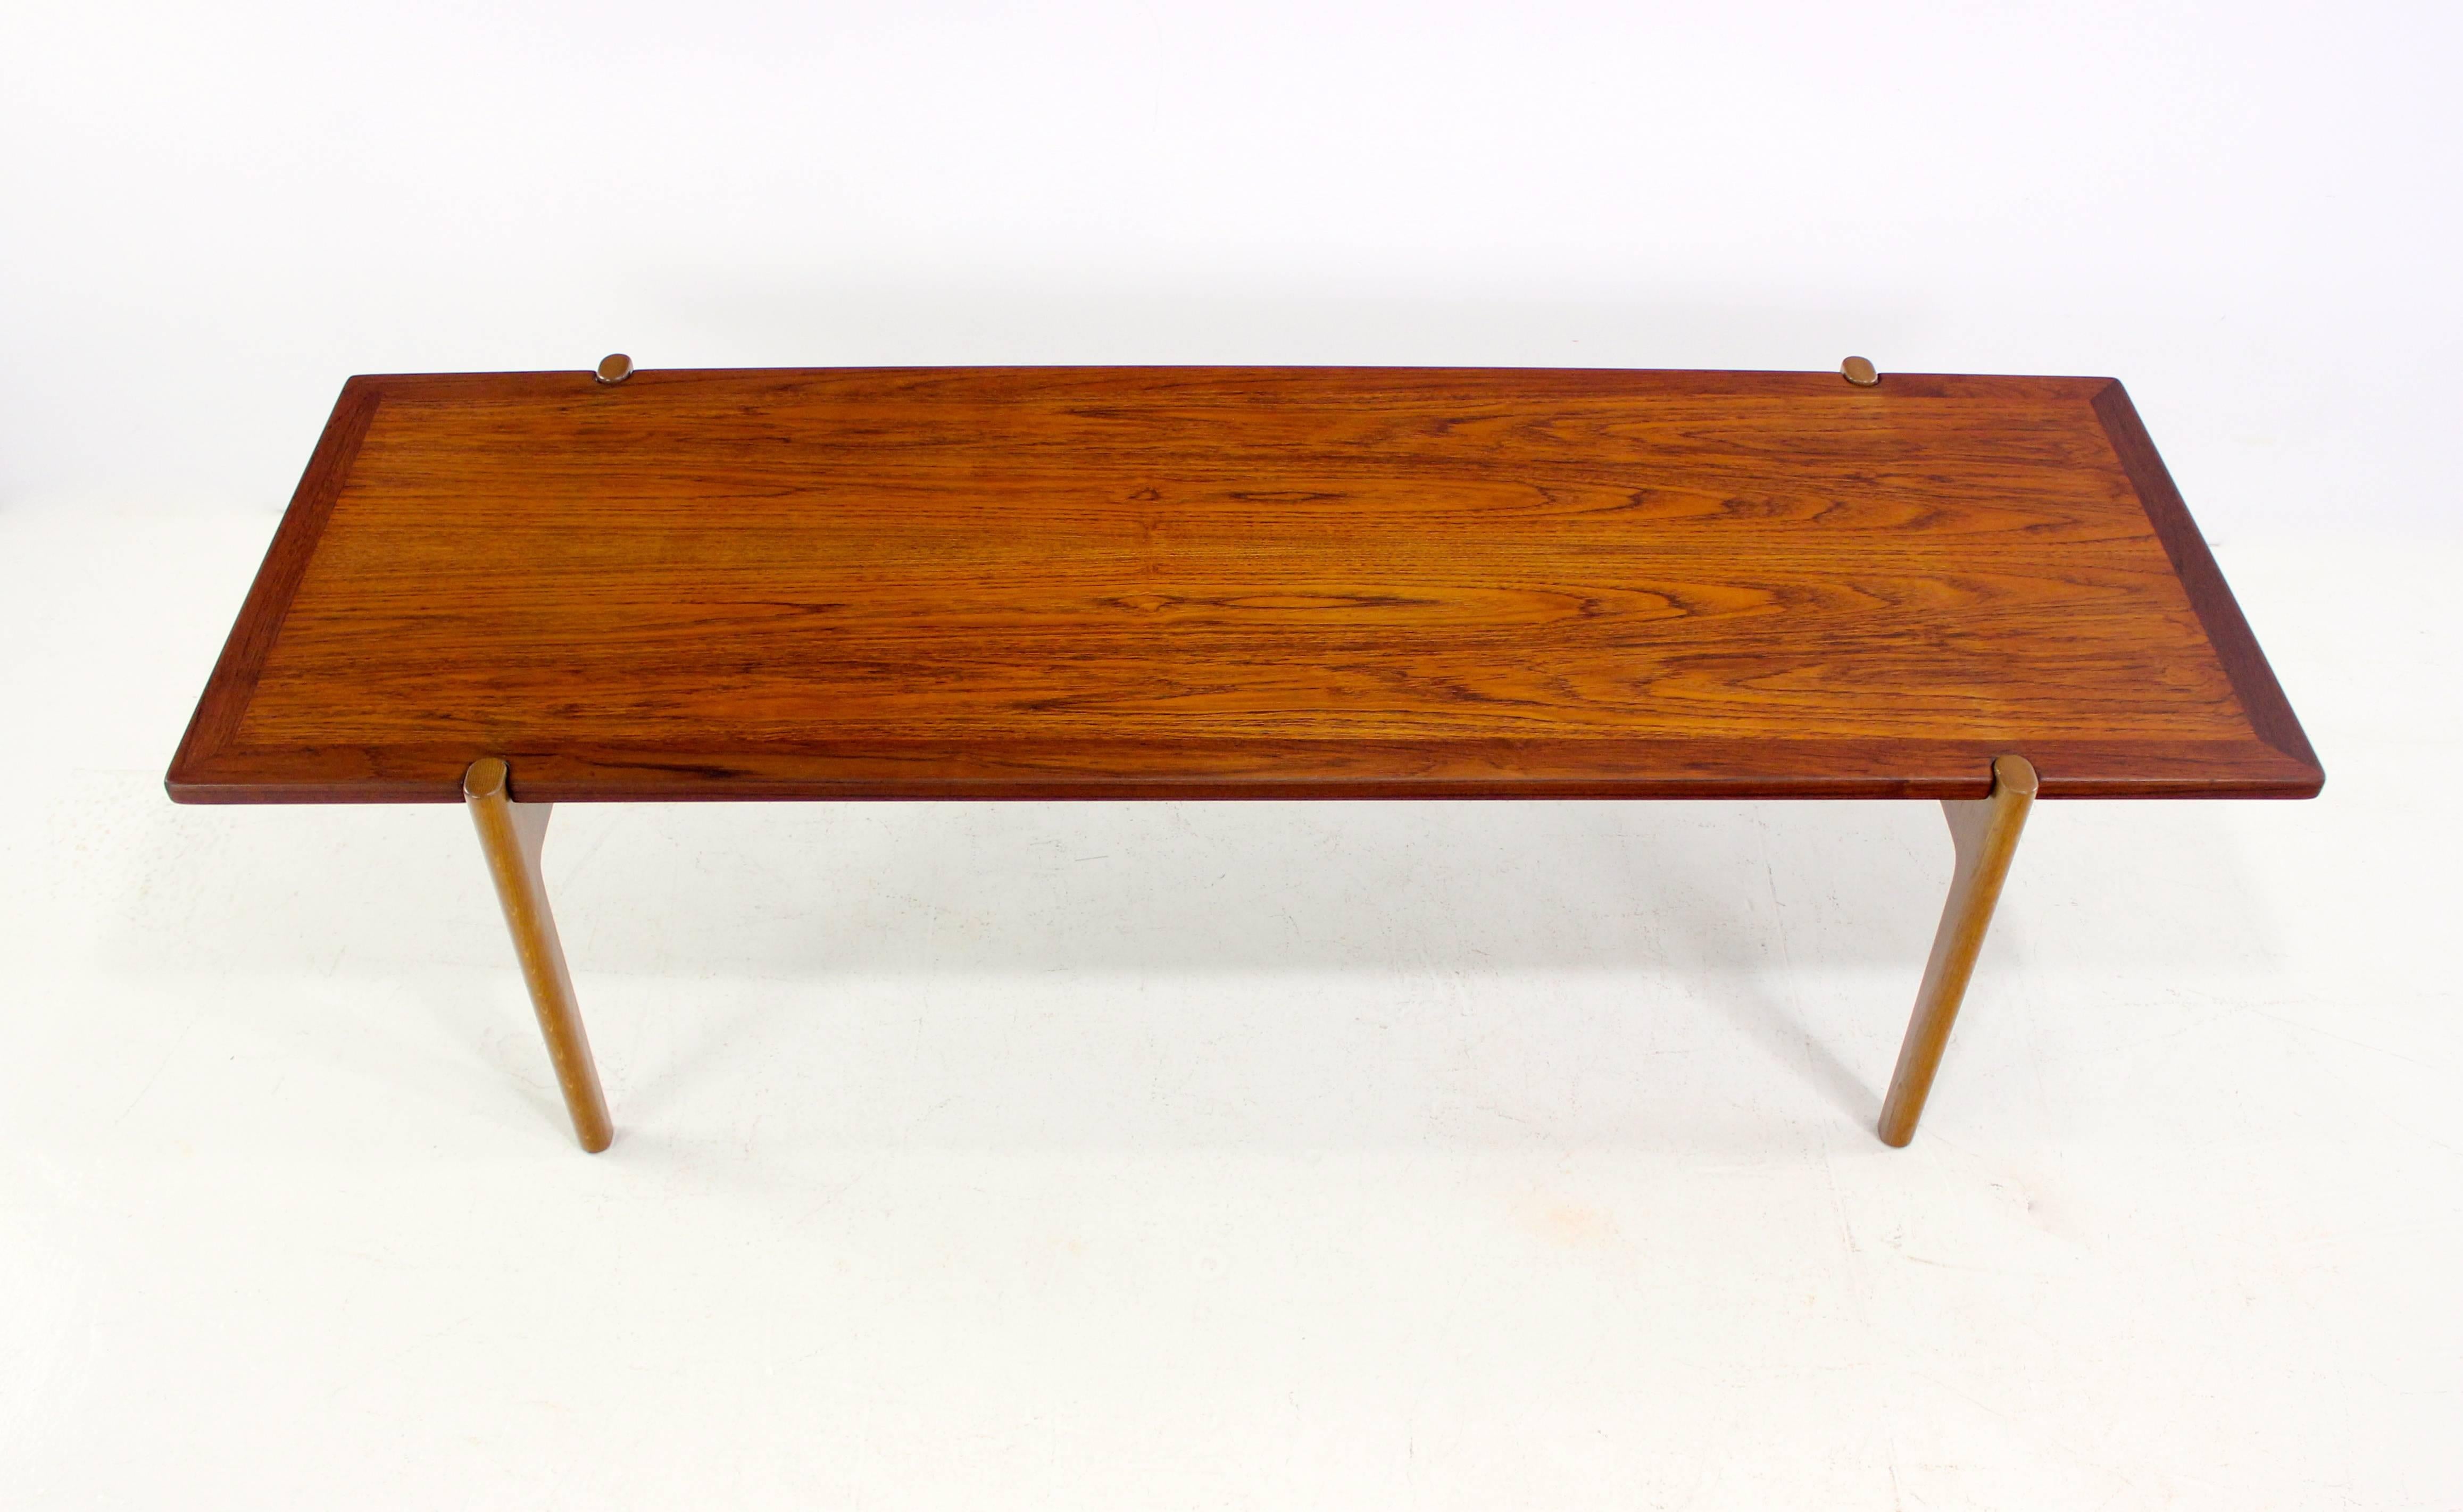 Danish modern coffee table designed by Hans Wegner.
Johannes Hansen, maker. Model JH 564.
Oak base with brass hardware.
Teak top with inlay on edge reverses to black laminate.
Professionally restored and refinished by LookModern.
Matchless